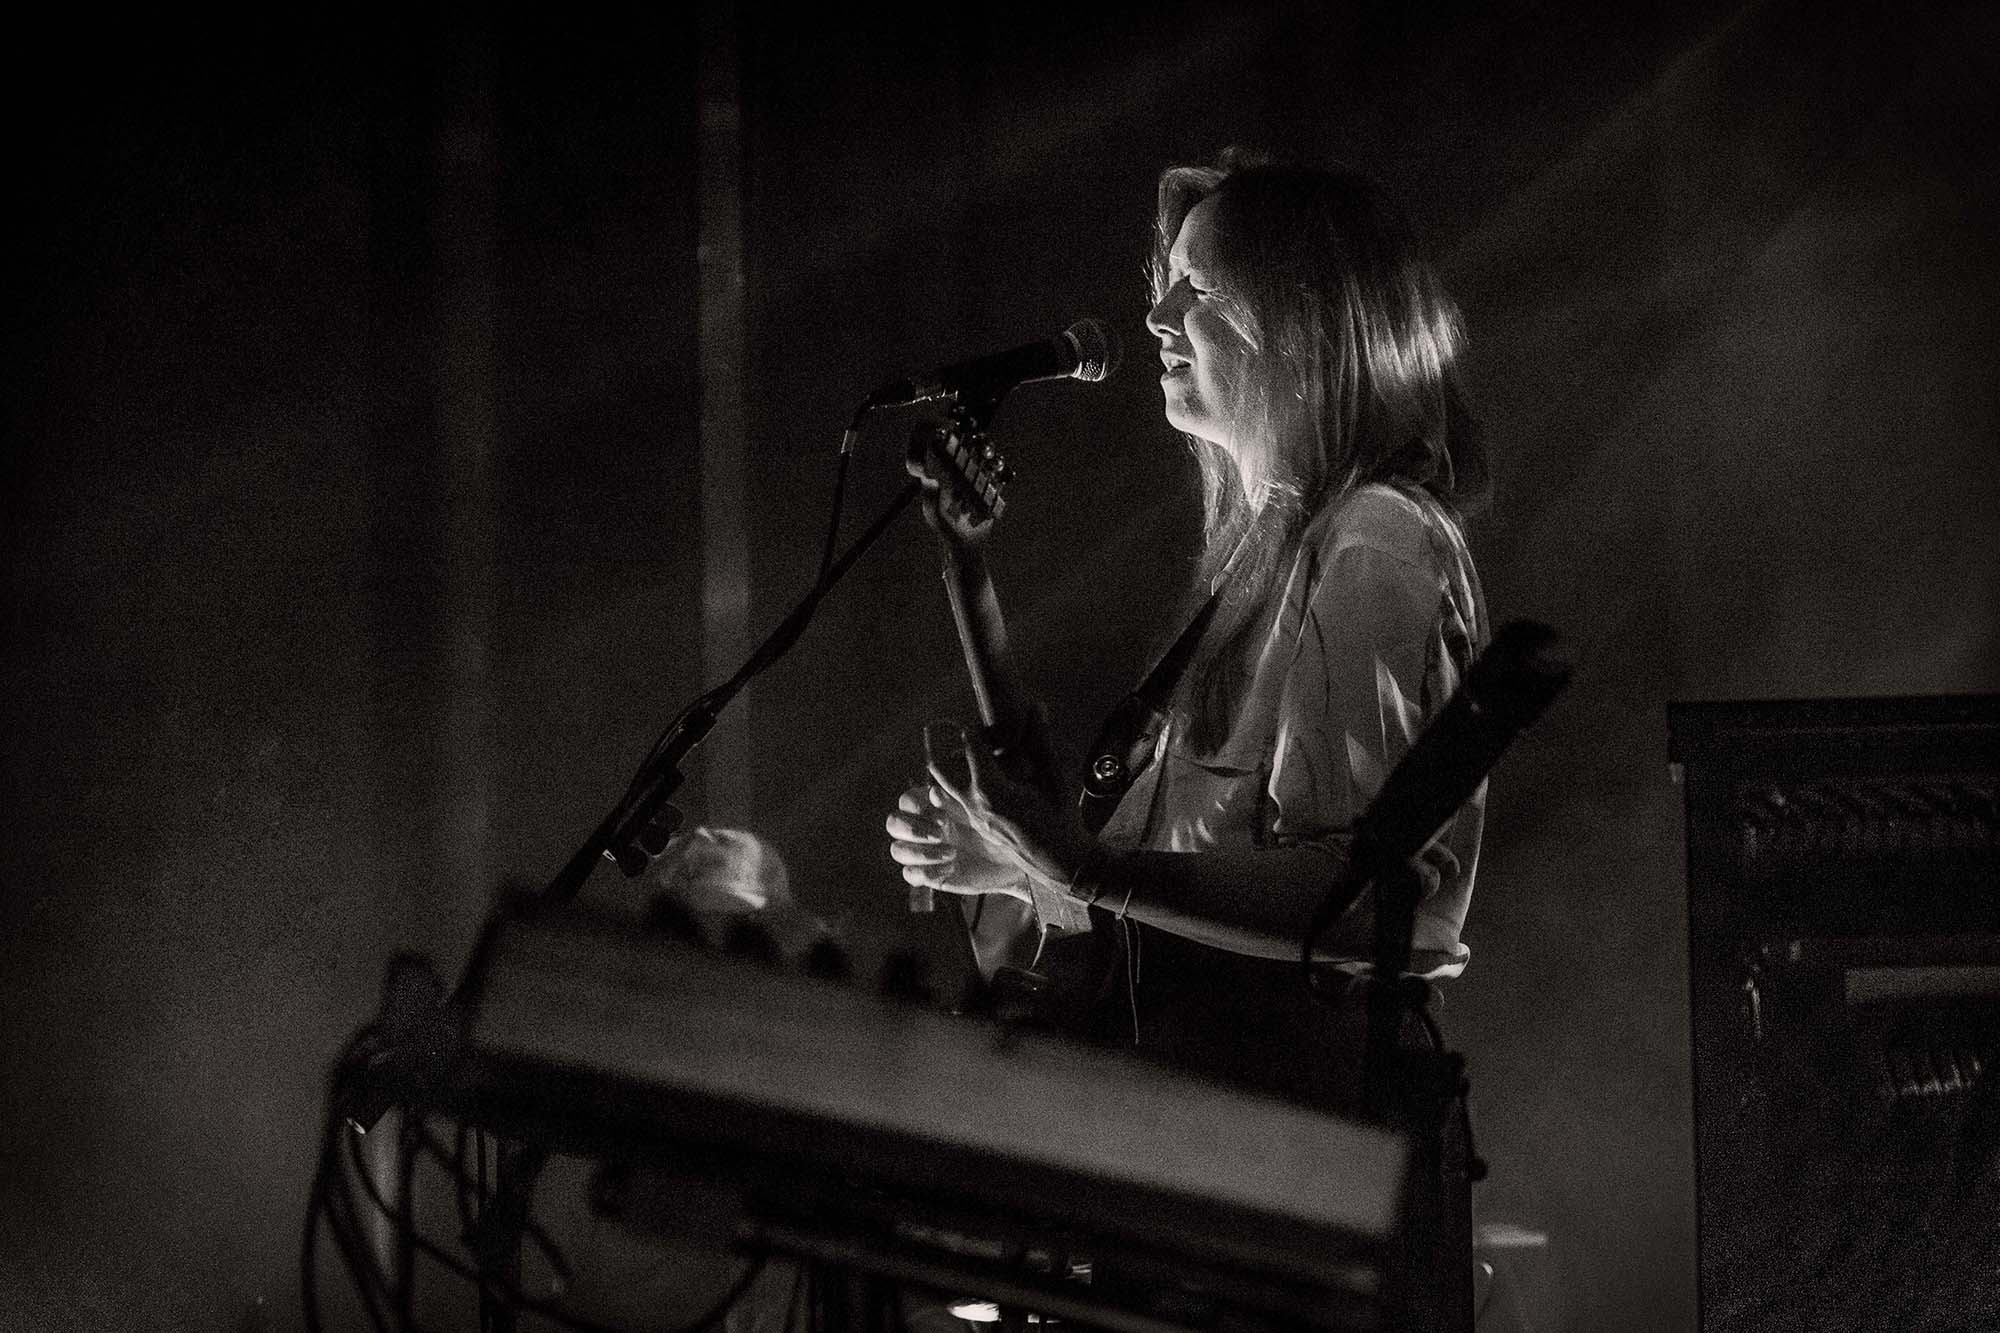 Sophie Hunger live at Columbia Theater Berlin captured by Yvonne Hartmann